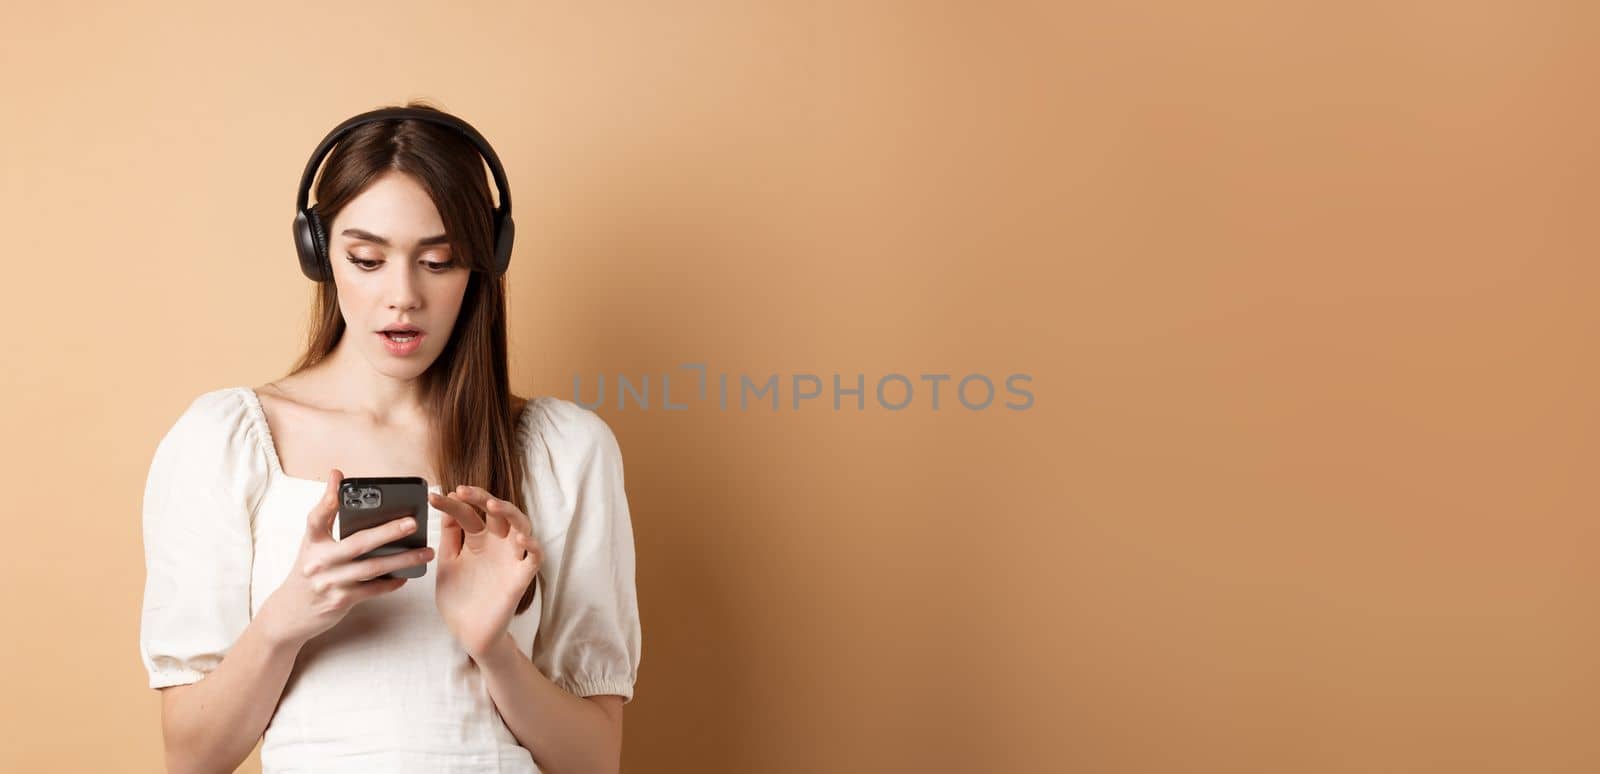 Excited girl listen music in headphones and looking at smartphone amazed, reading awesome news, found cool playlist, standing on beige background.